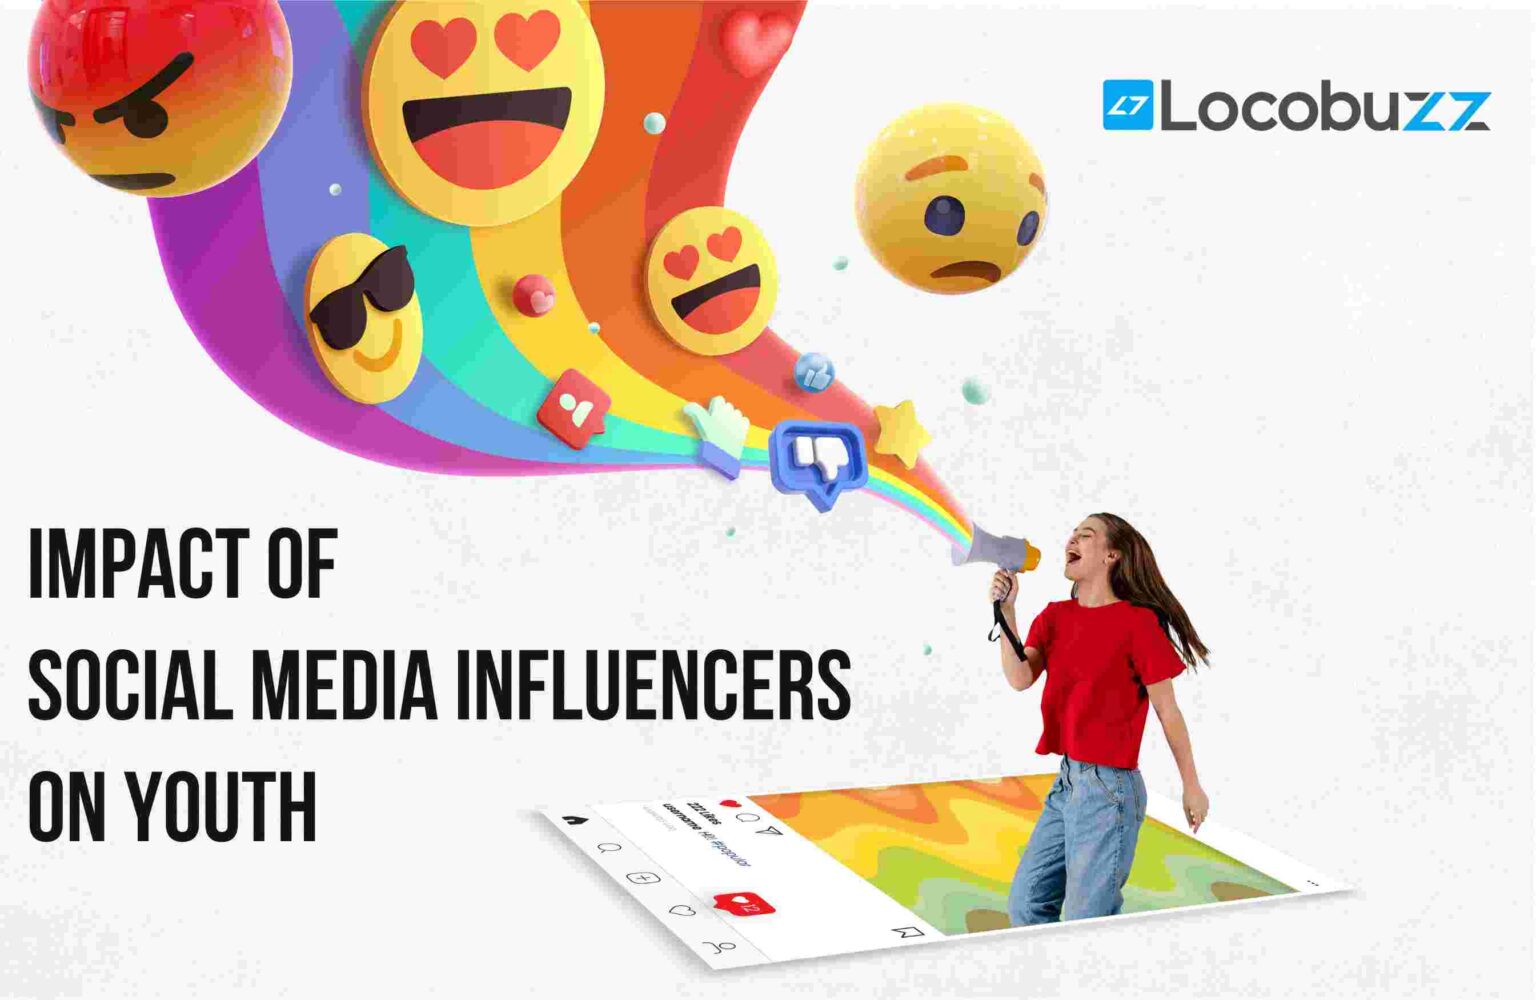 impact of social media influencers on youth research paper